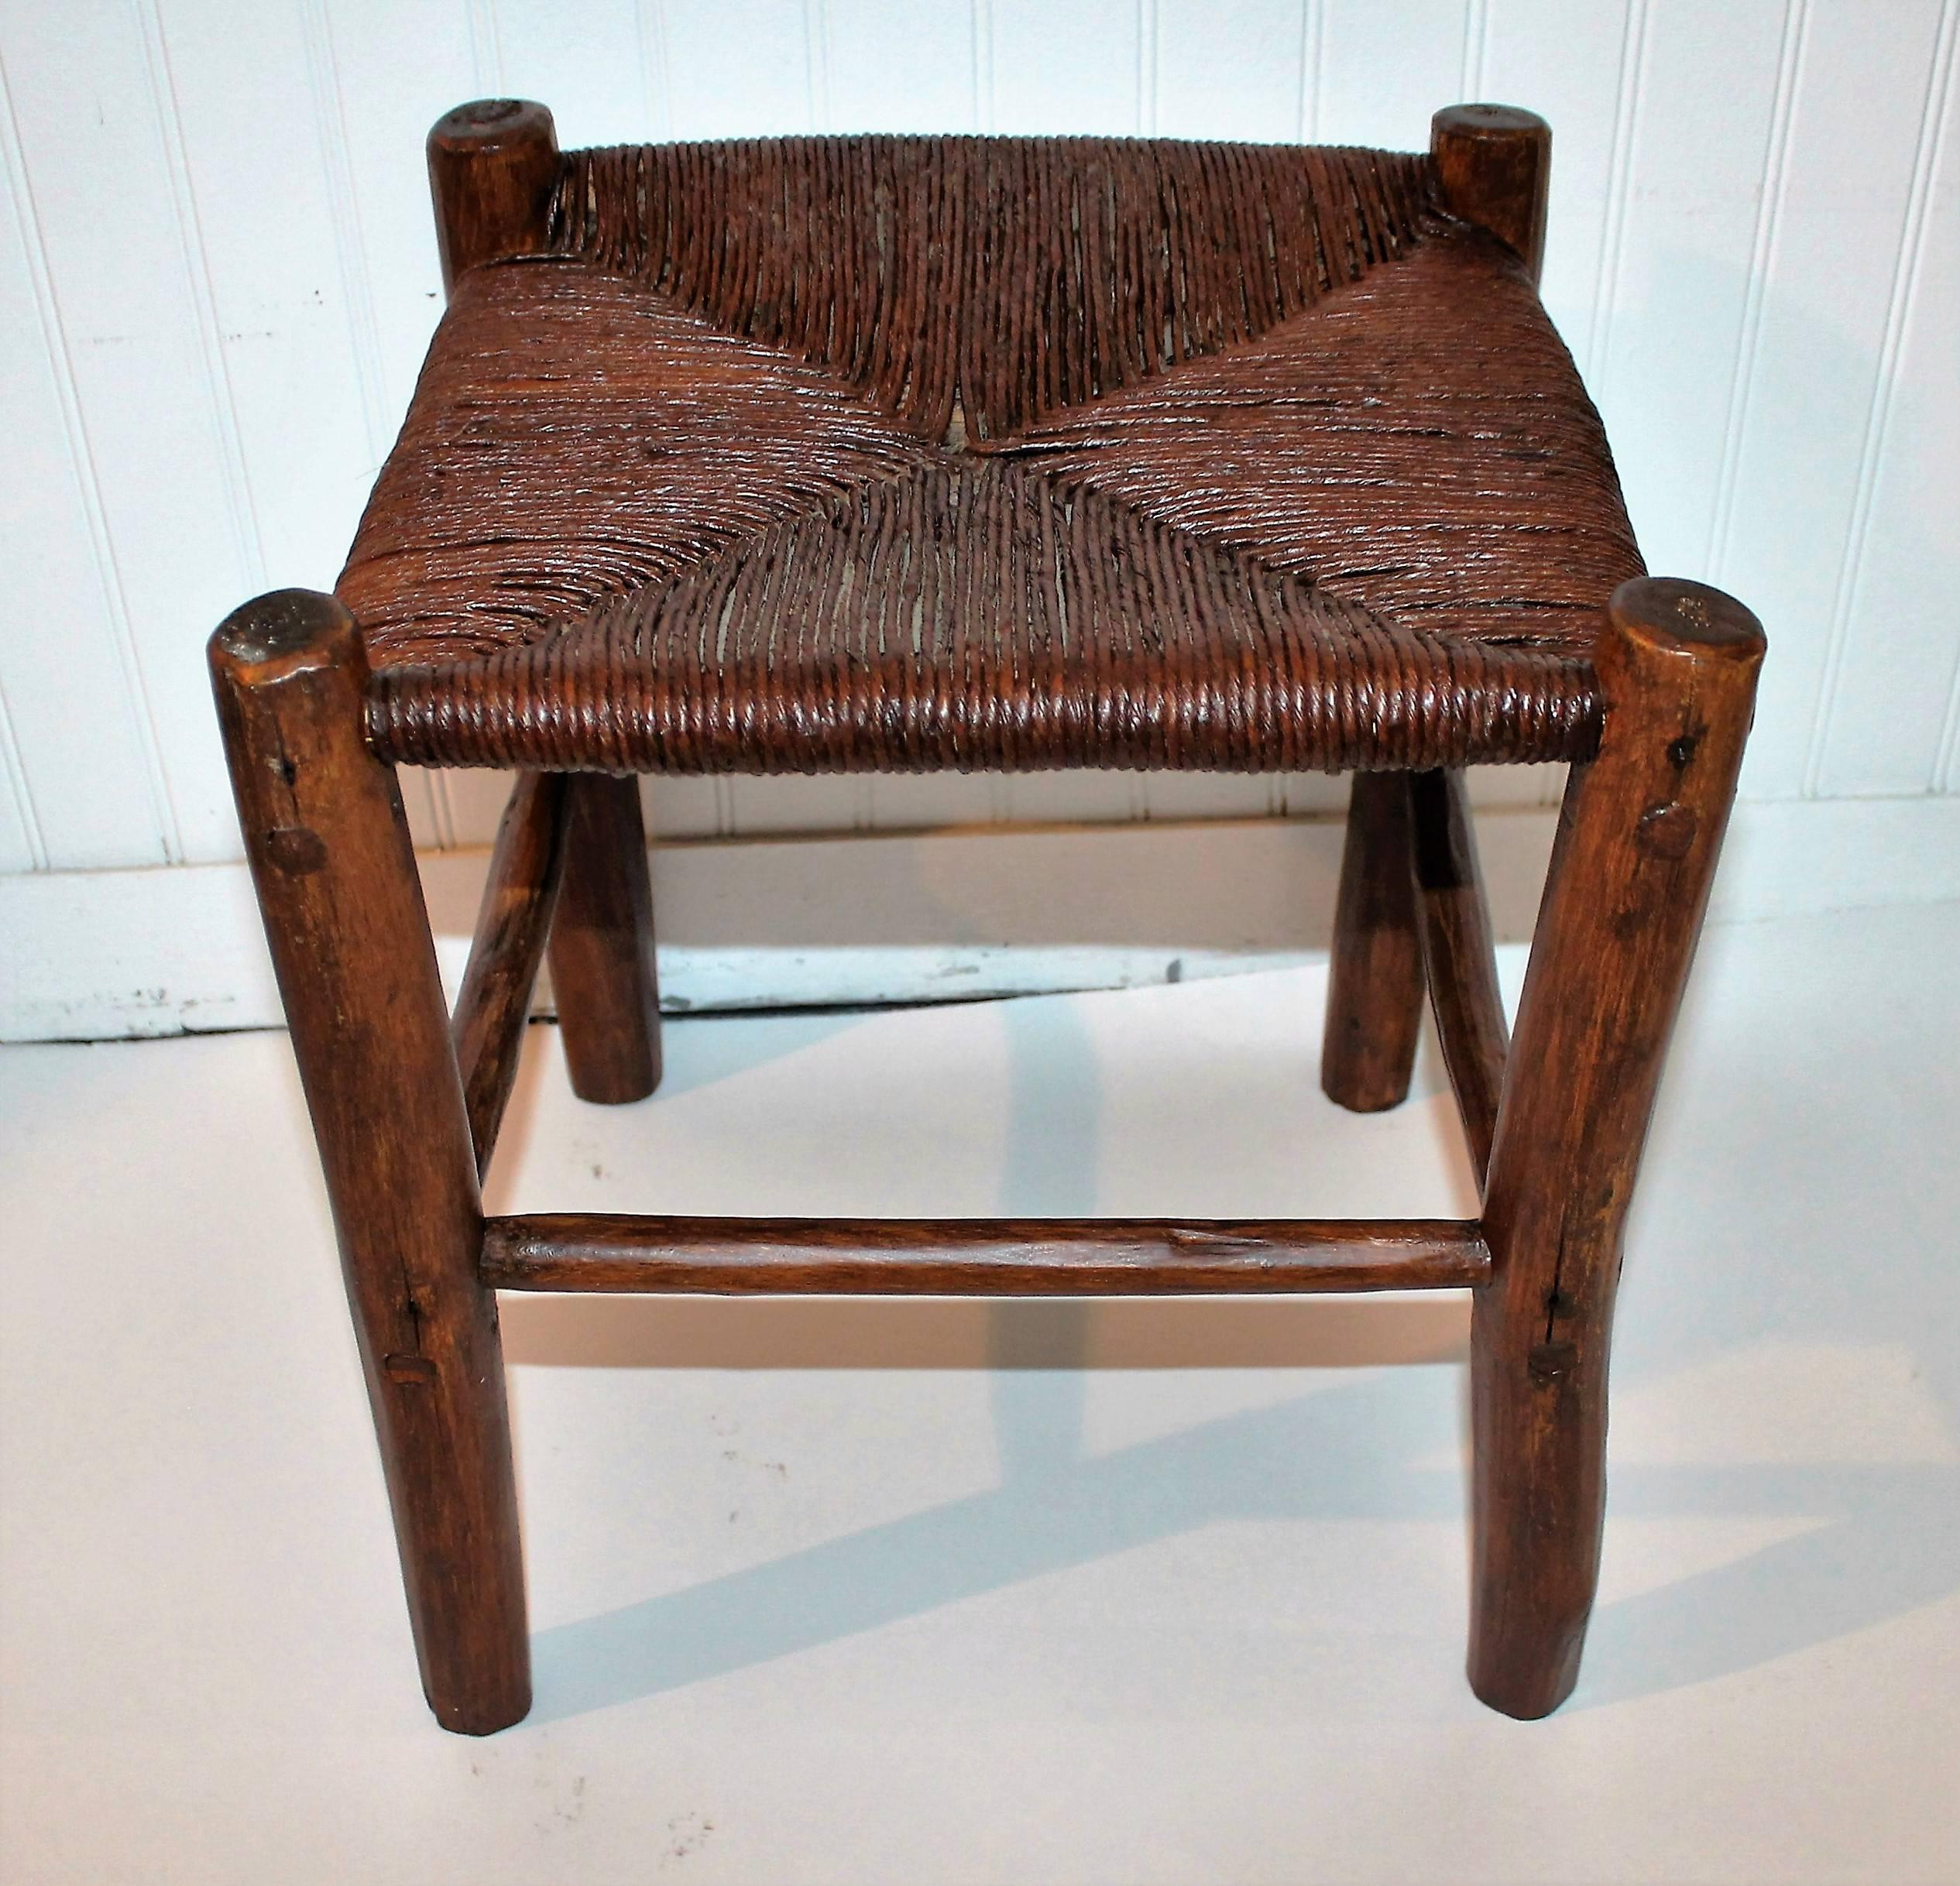 This handmade hickory foot stool is in great and sturdy condition. The hand woven stool is pegged and has a stained surface.